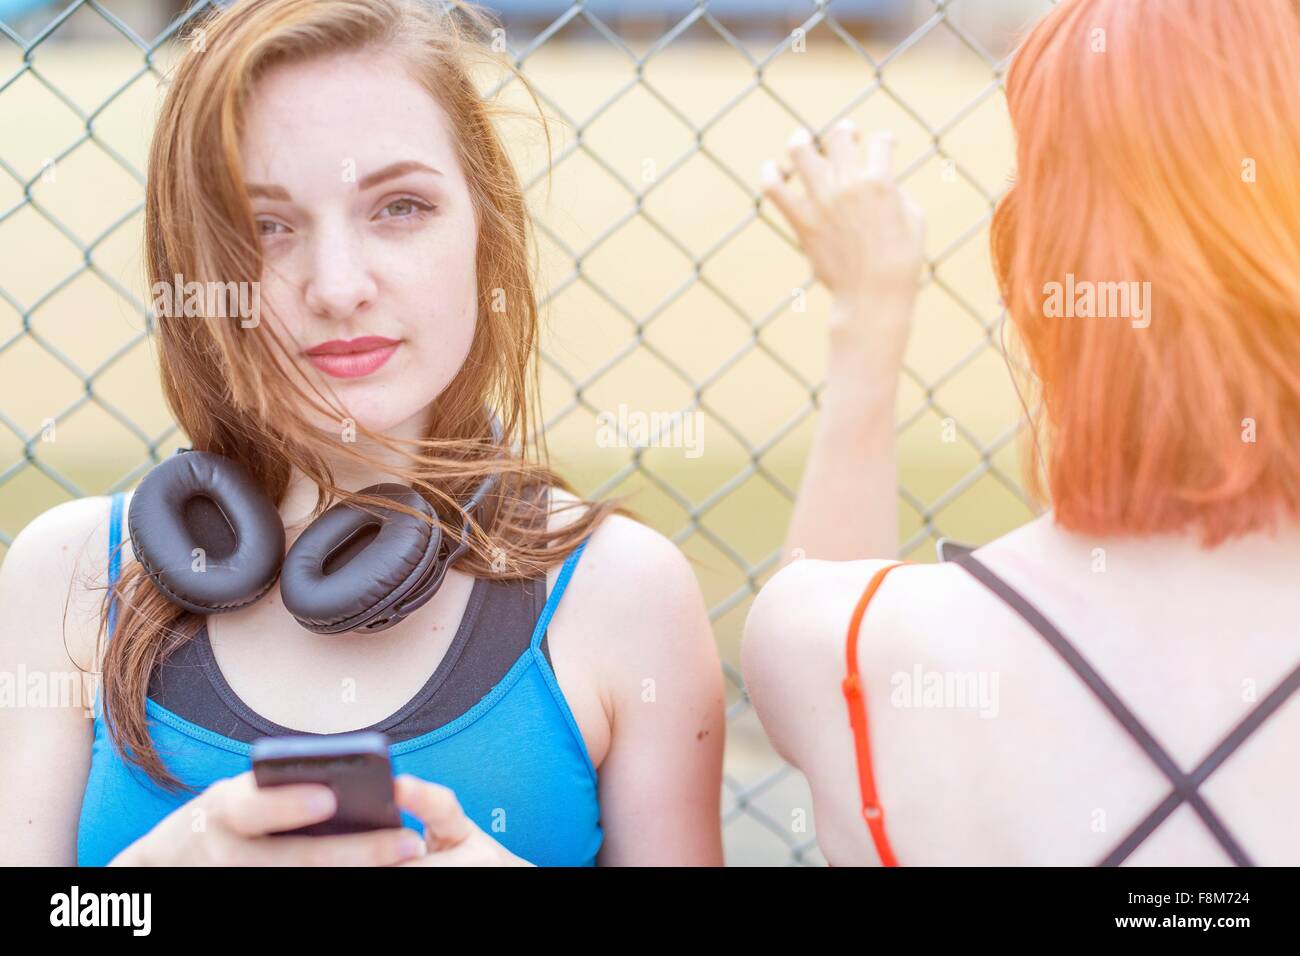 Young woman using smartphone beside fence Stock Photo